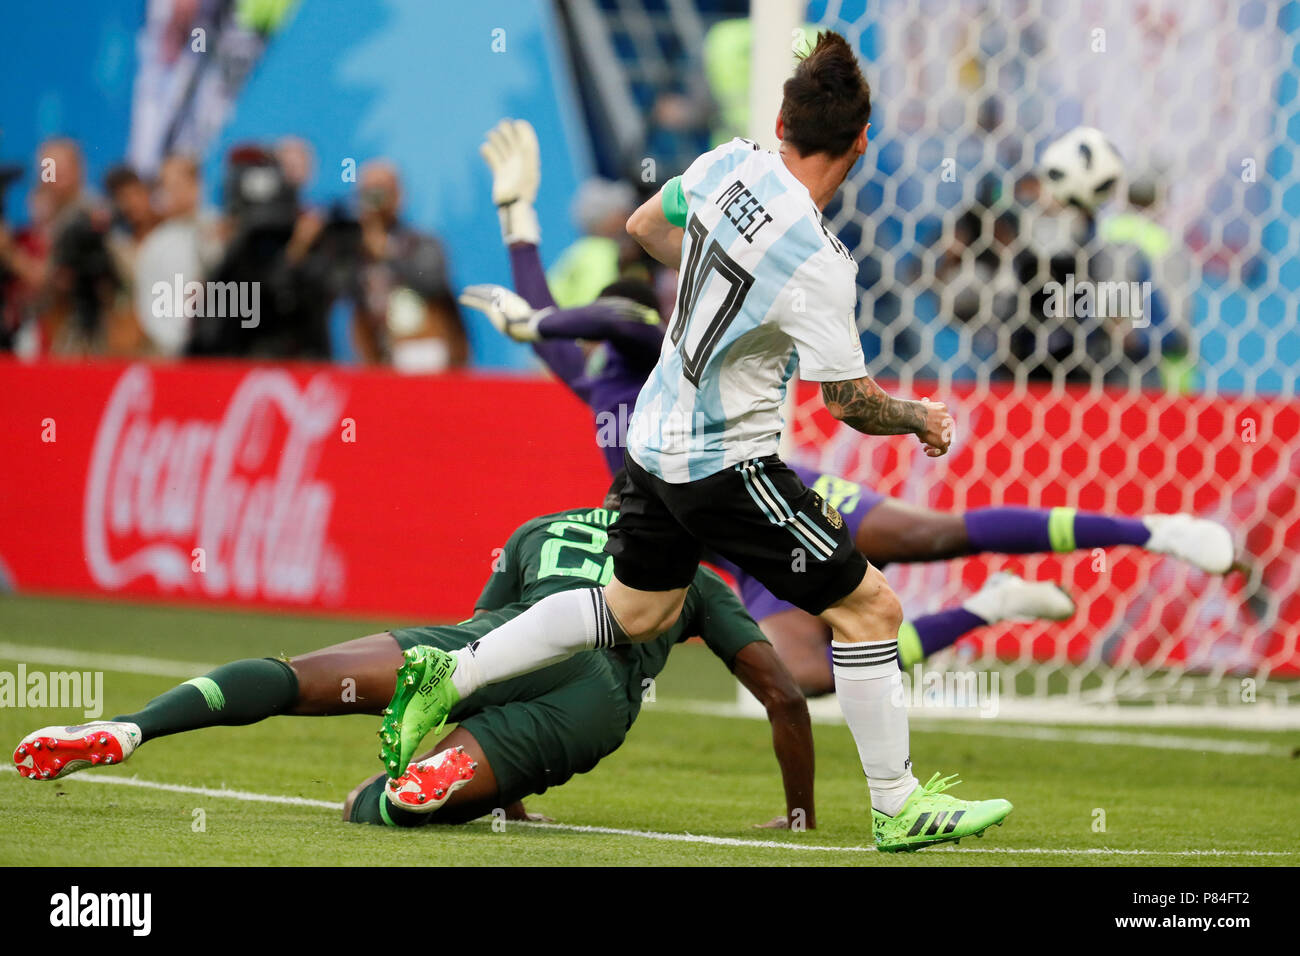 SAINT PETERSBURG, RUSSIA - JUNE 26: Lionel Messi (C) of Argentina national team scores a goal during the 2018 FIFA World Cup Russia group D match between Nigeria and Argentina at Saint Petersburg Stadium on June 26, 2018 in Saint Petersburg, Russia. (MB Media) Stock Photo